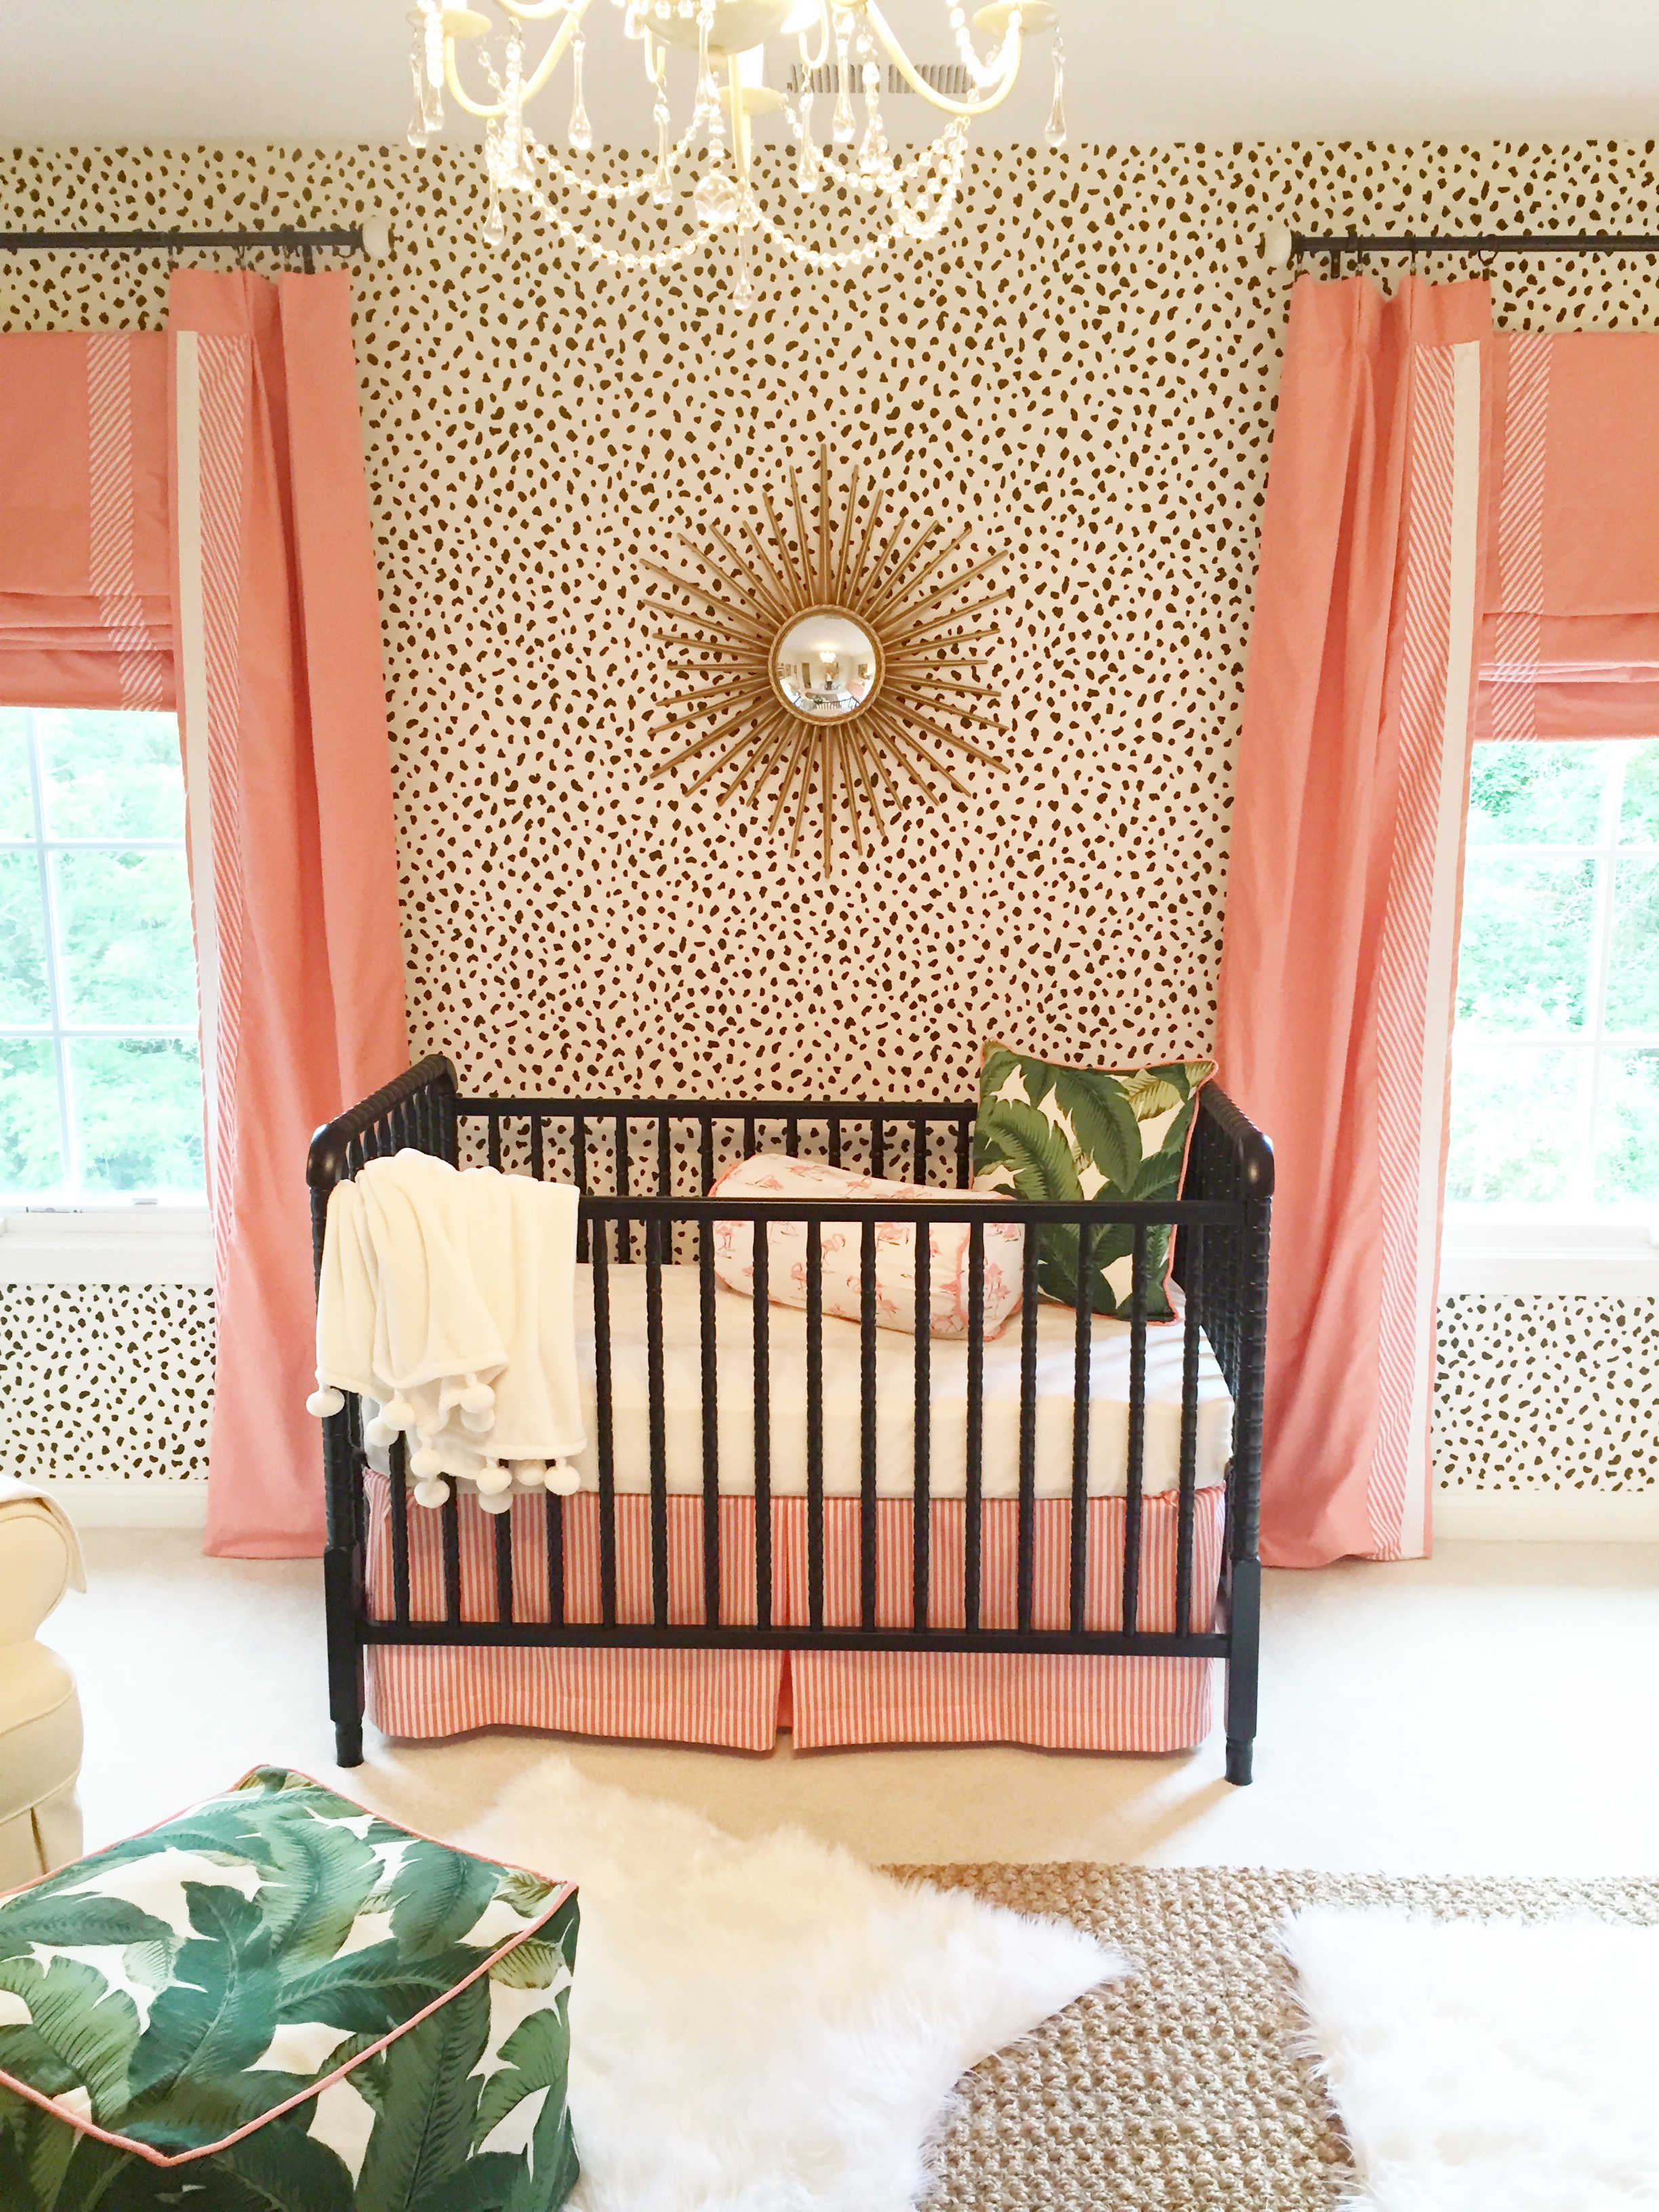 Black and Cream Dalmatian Print Wallpaper in this Coral and Gold Nursery